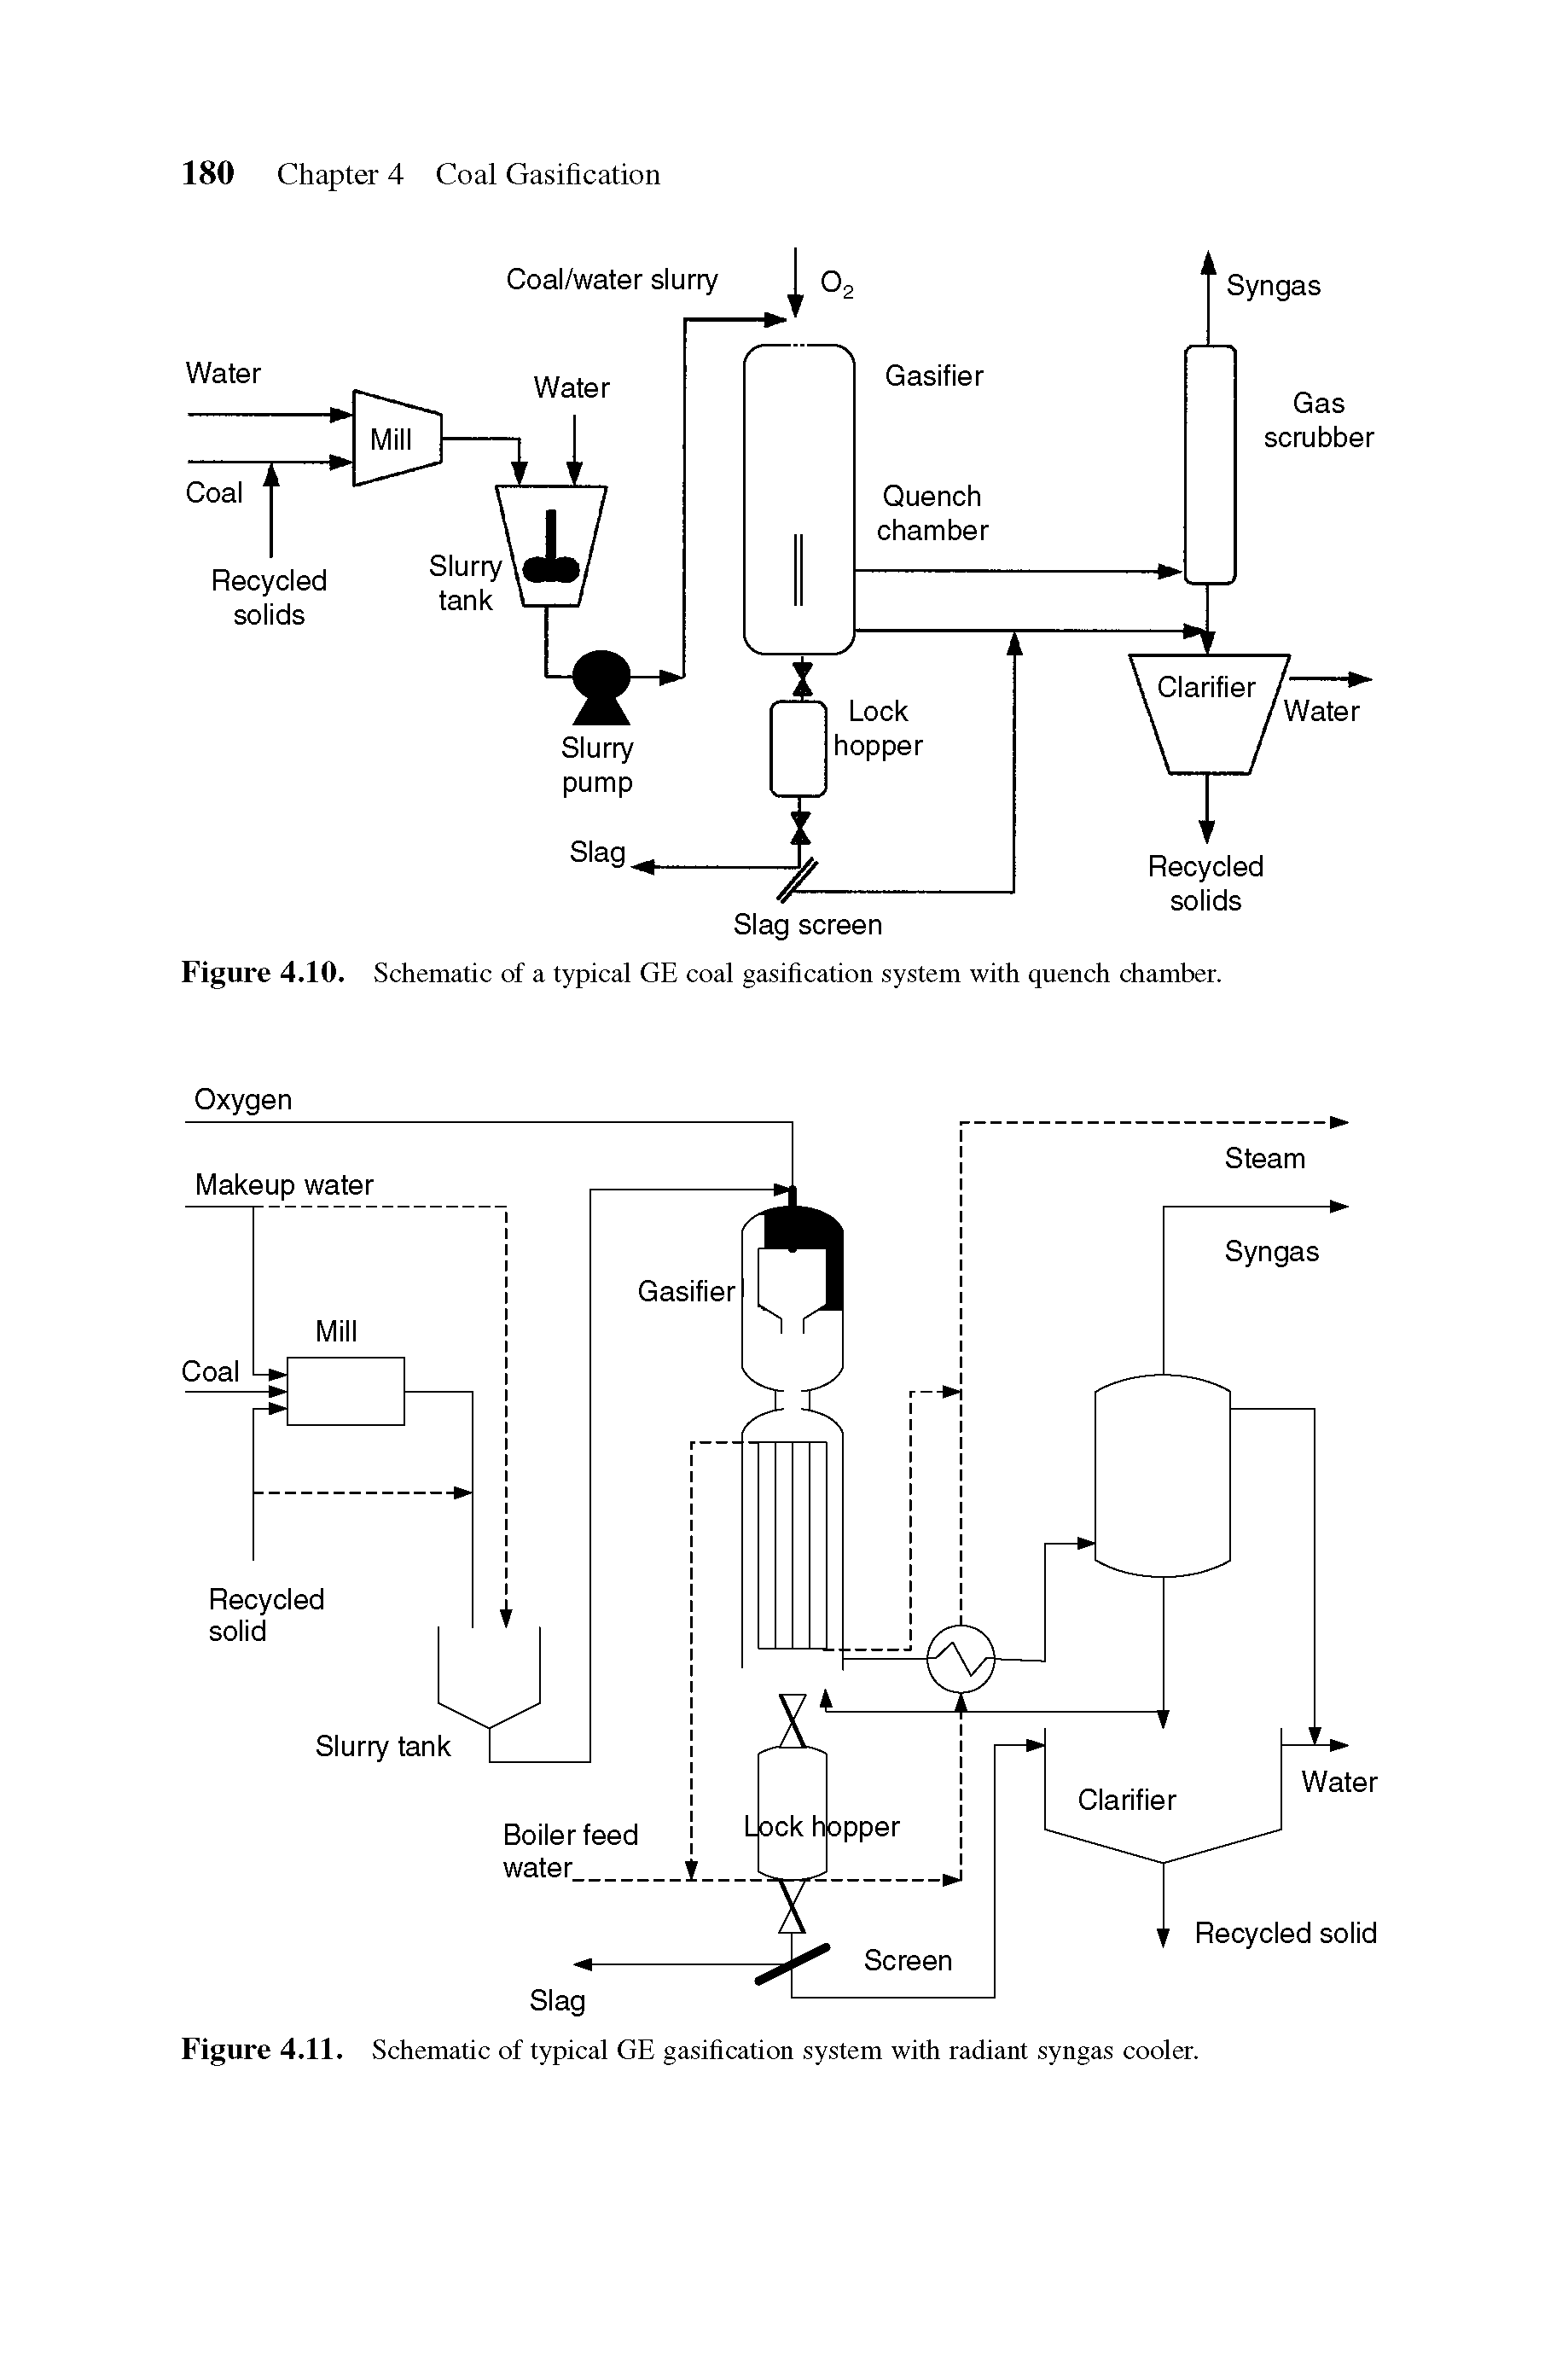 Figure 4.10. Schematic of a typical GE coal gasification system with quench chamber.